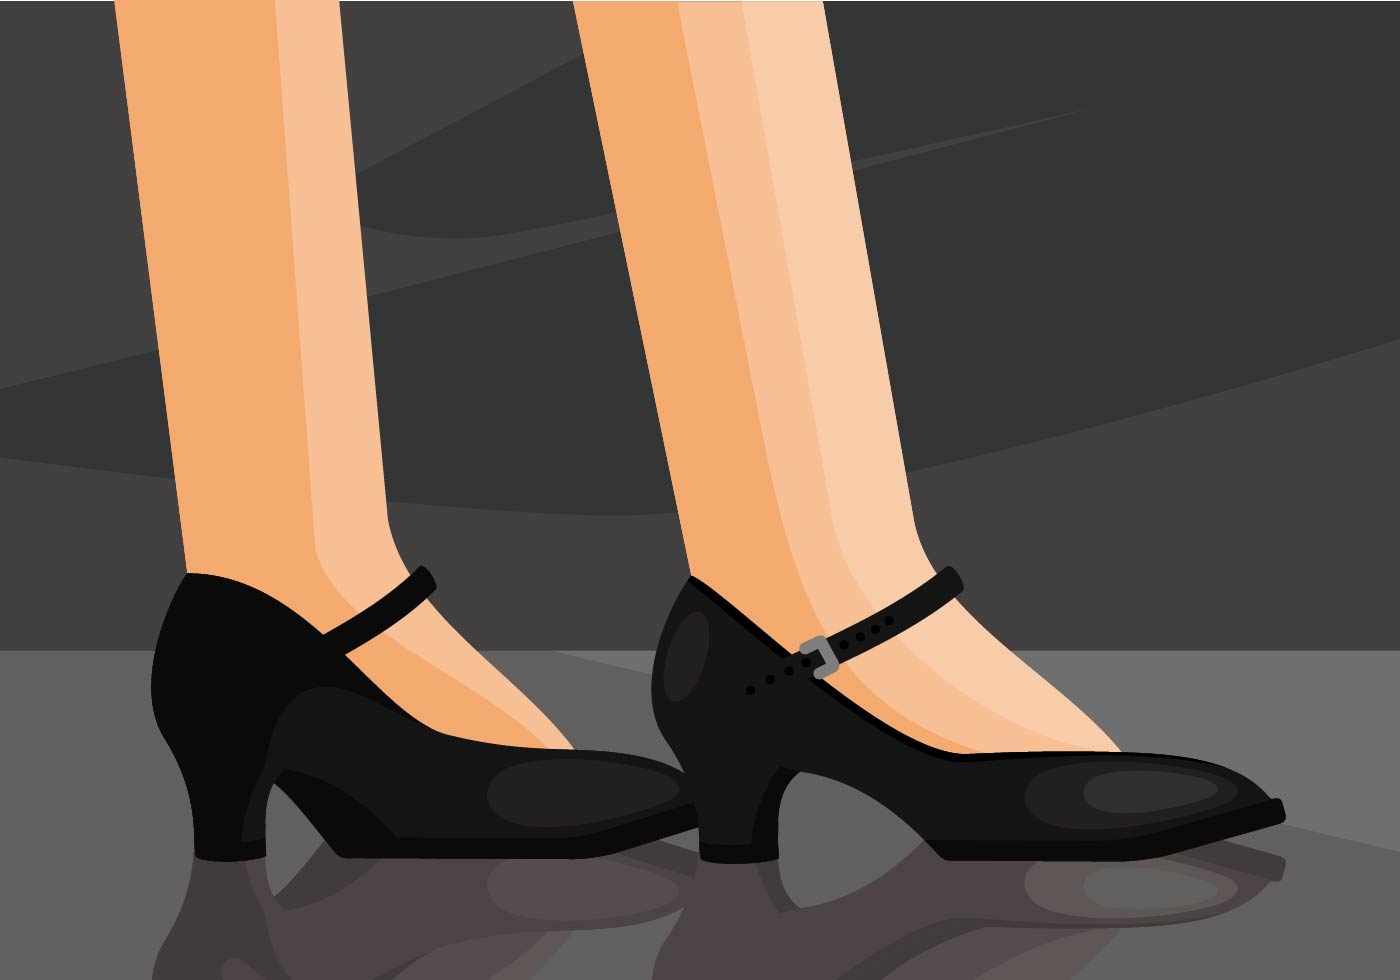 Download Tap Shoes Illustration 168598 Vector Art at Vecteezy